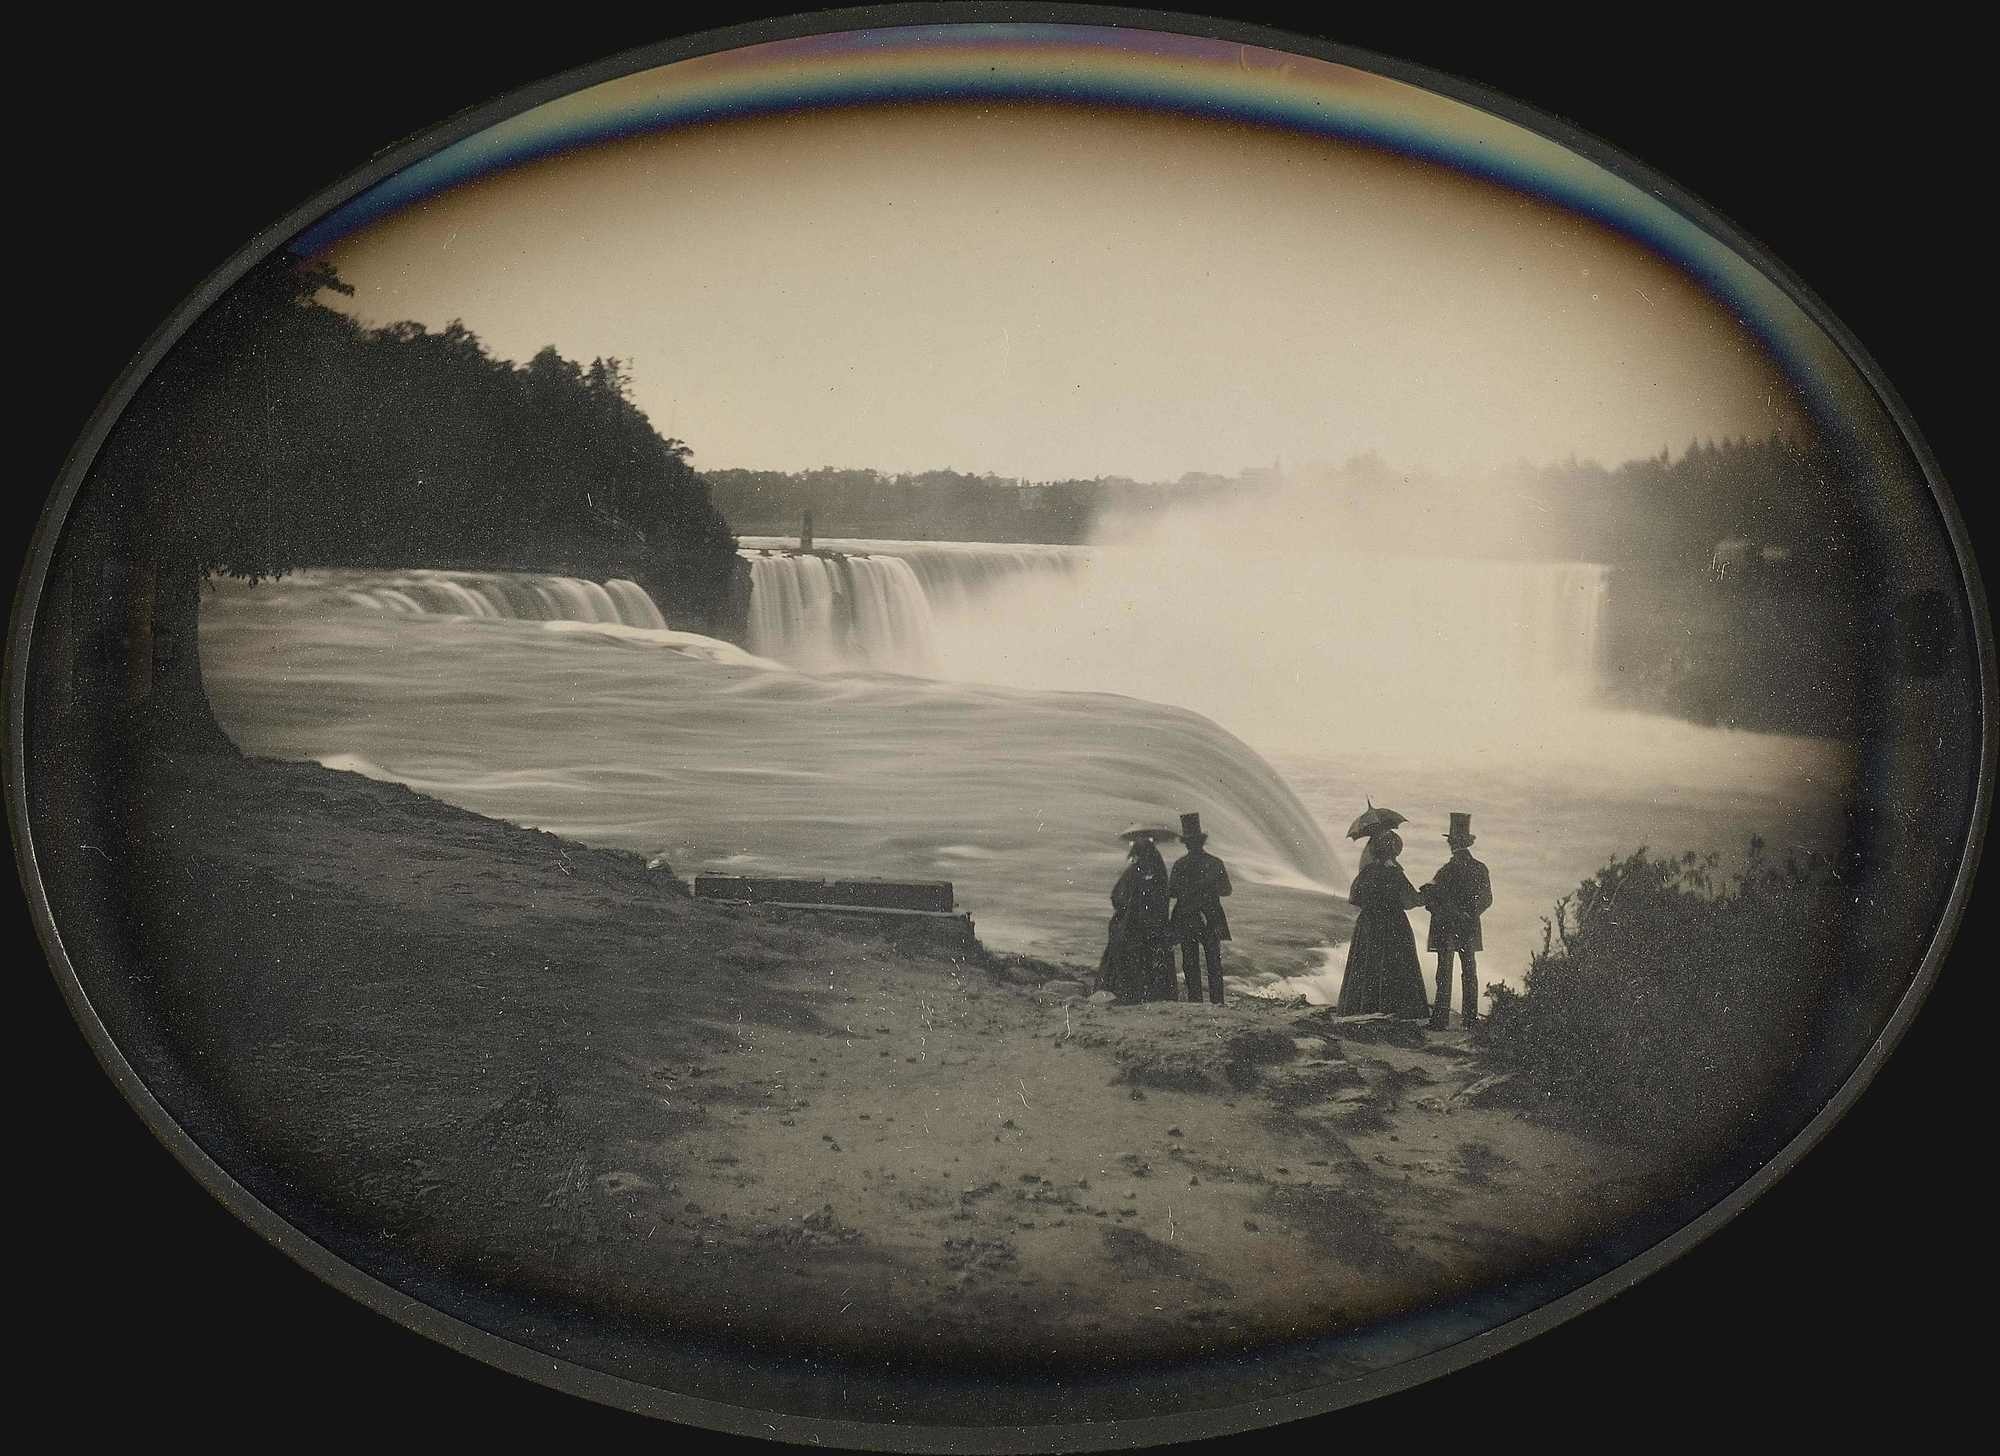 Niagara Falls has captivated people's hearts from the beginning. Two couples enjoying the waterfall in 1855.